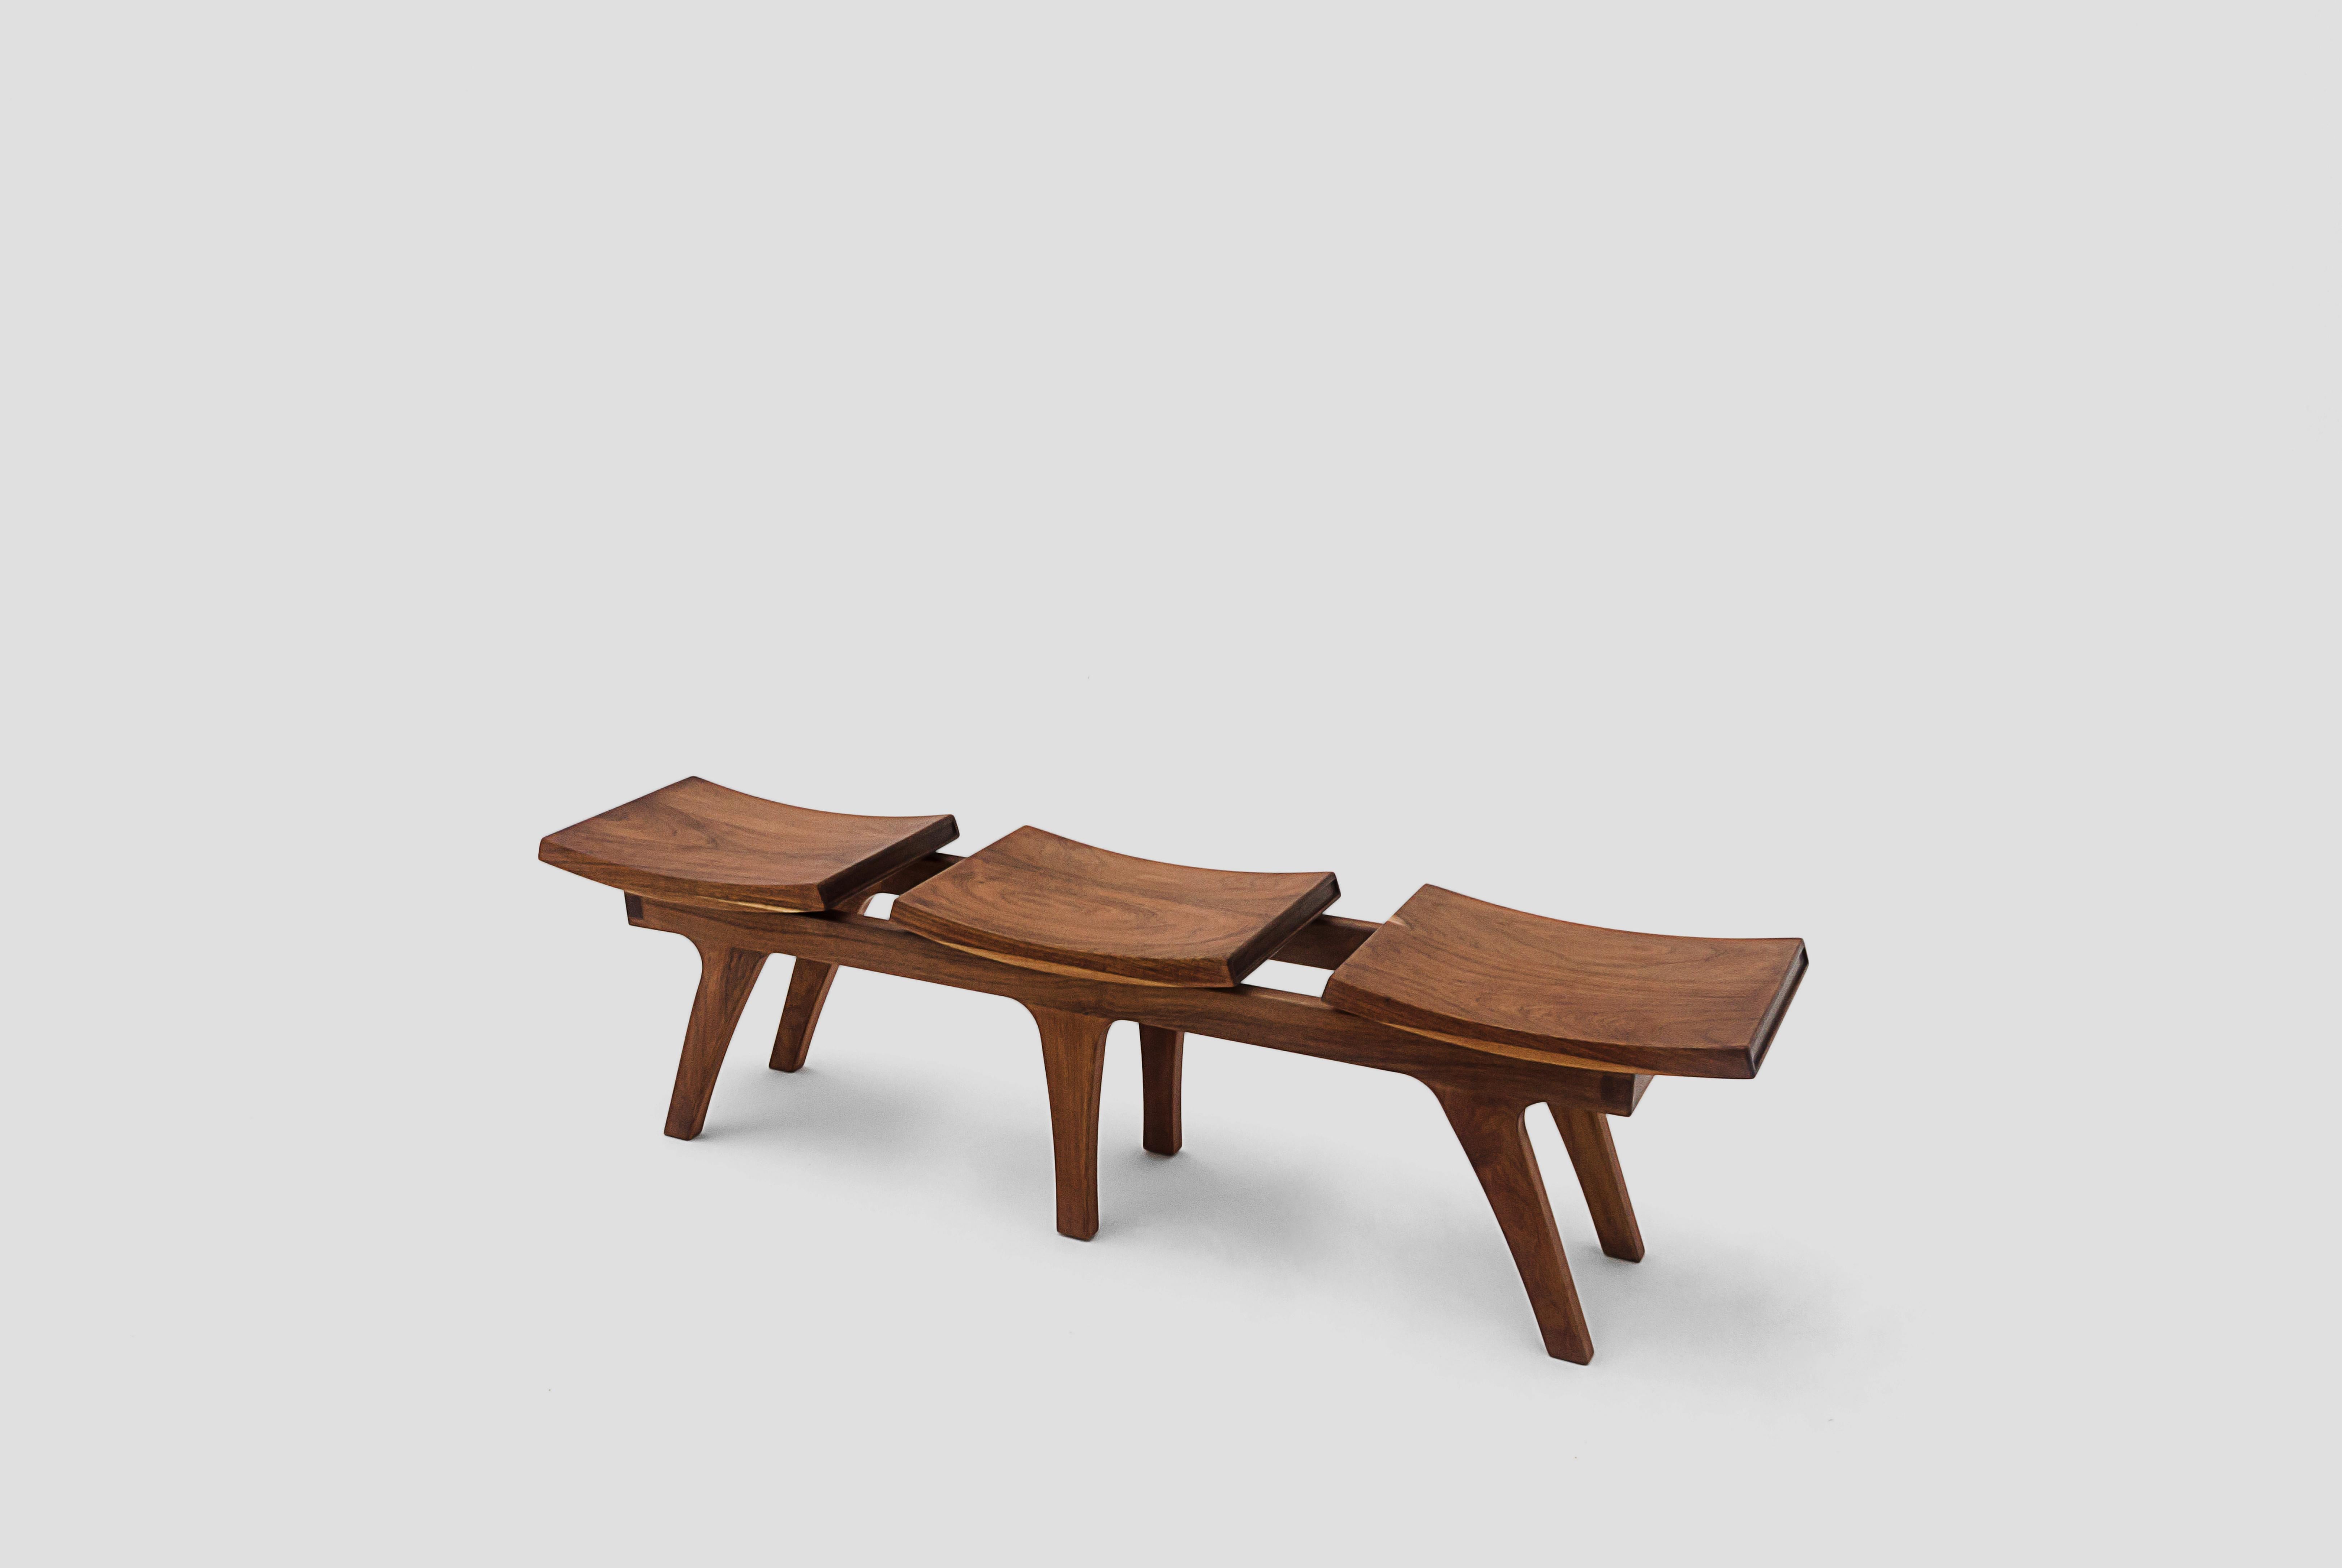 Tripot is a walnut bench with three seats designed by Arturo Verástegui for Breur Estudio. This piece is part of Diseño y Ebanistería, Breur Estudio first ever collection, in which they collaborated with top designers to achieve exceptional